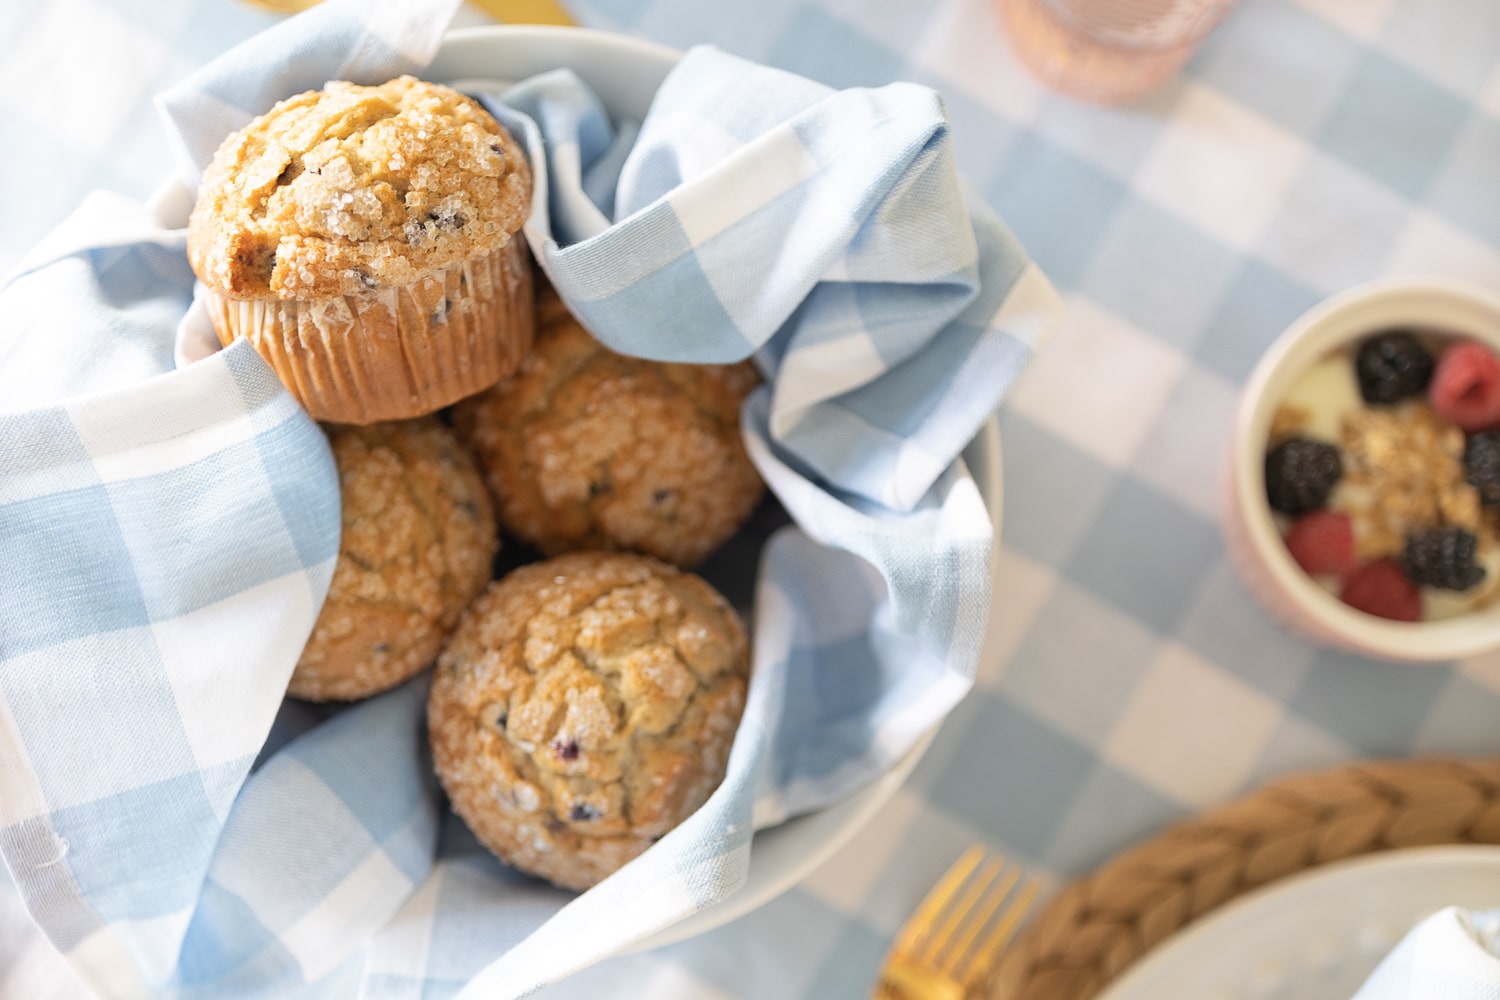 Gourmet blueberry muffins from Hy-Vee's pre-made brunch for four on Diary of a Debutante